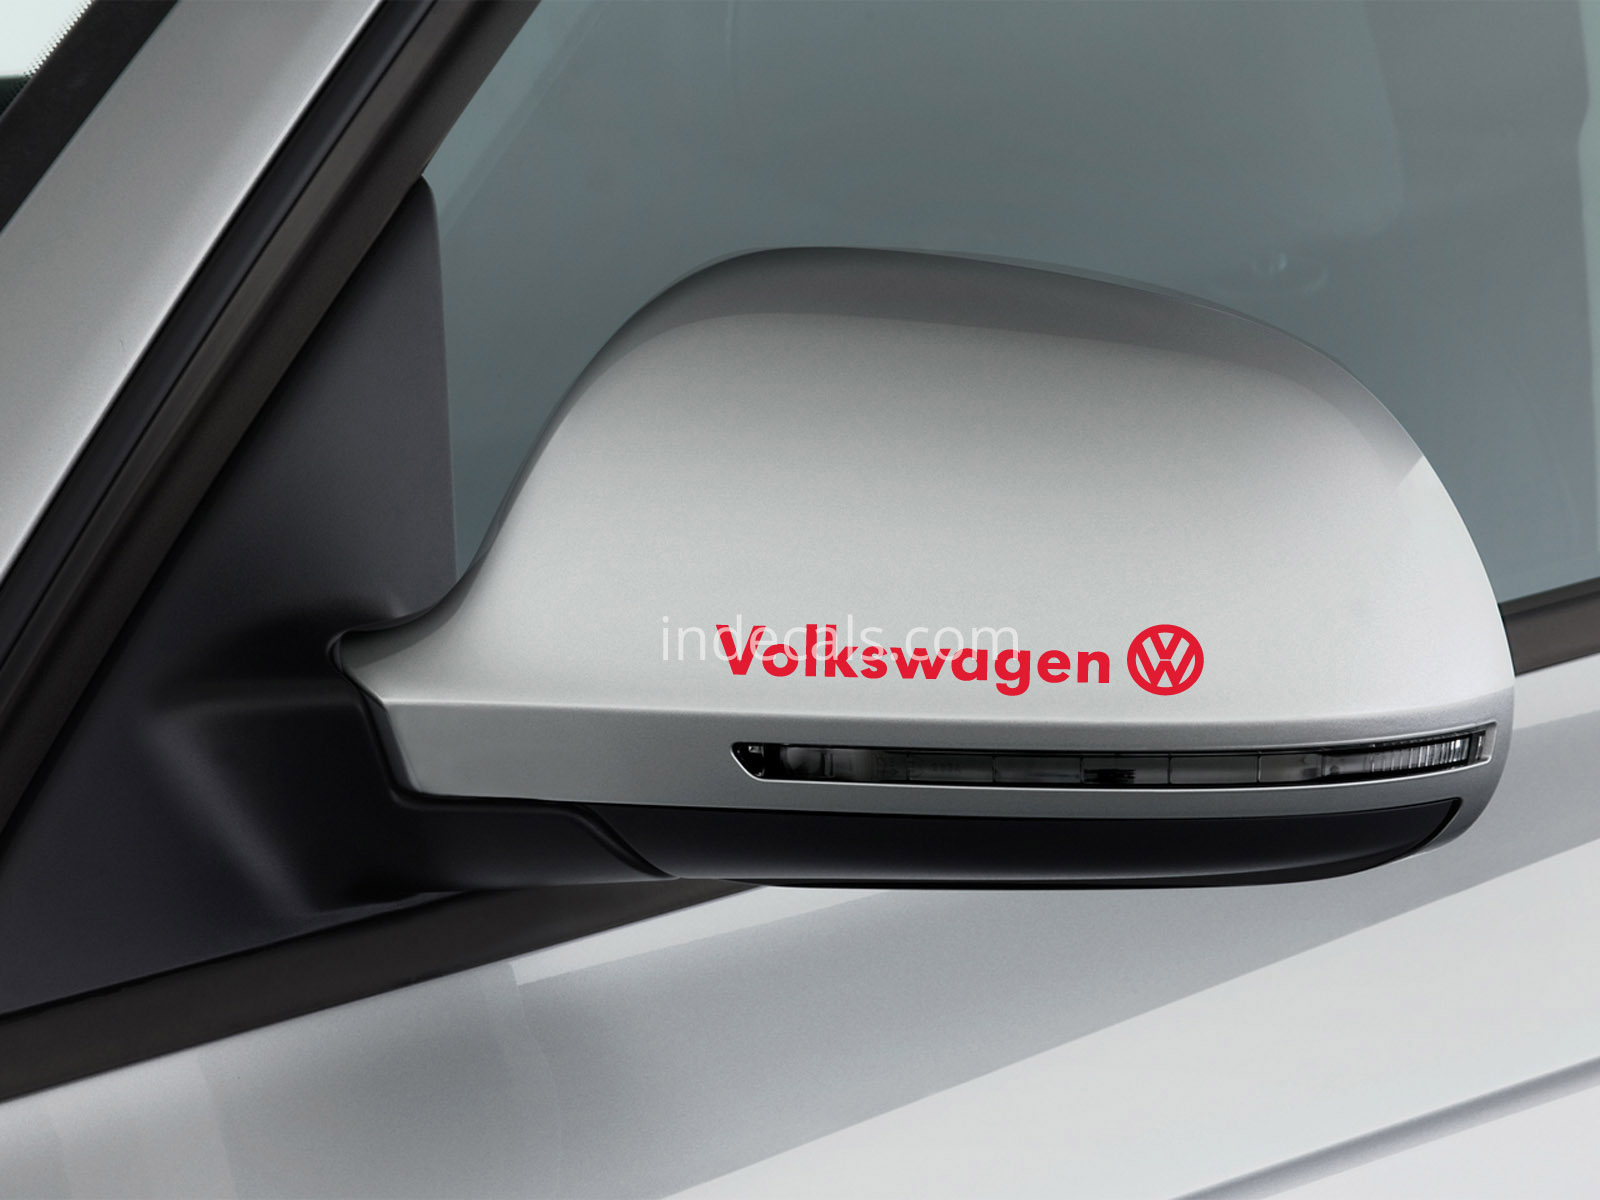 3 x Volkswagen Stickers for Mirrors - Red